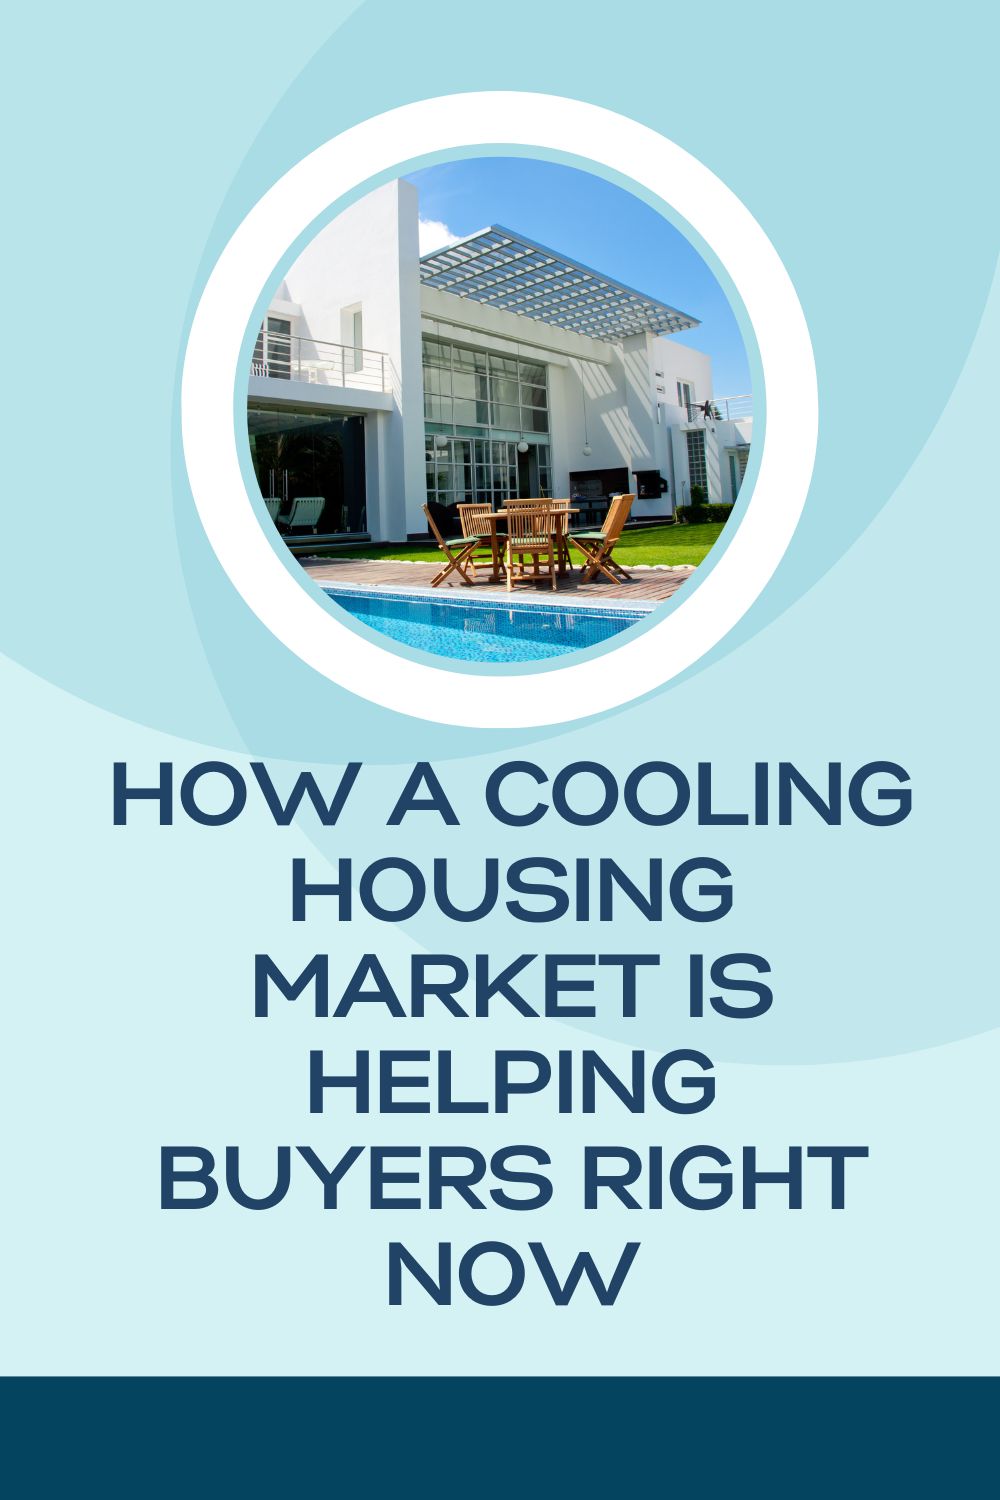 How a Cooling Housing Market is Helping Buyers Right Now